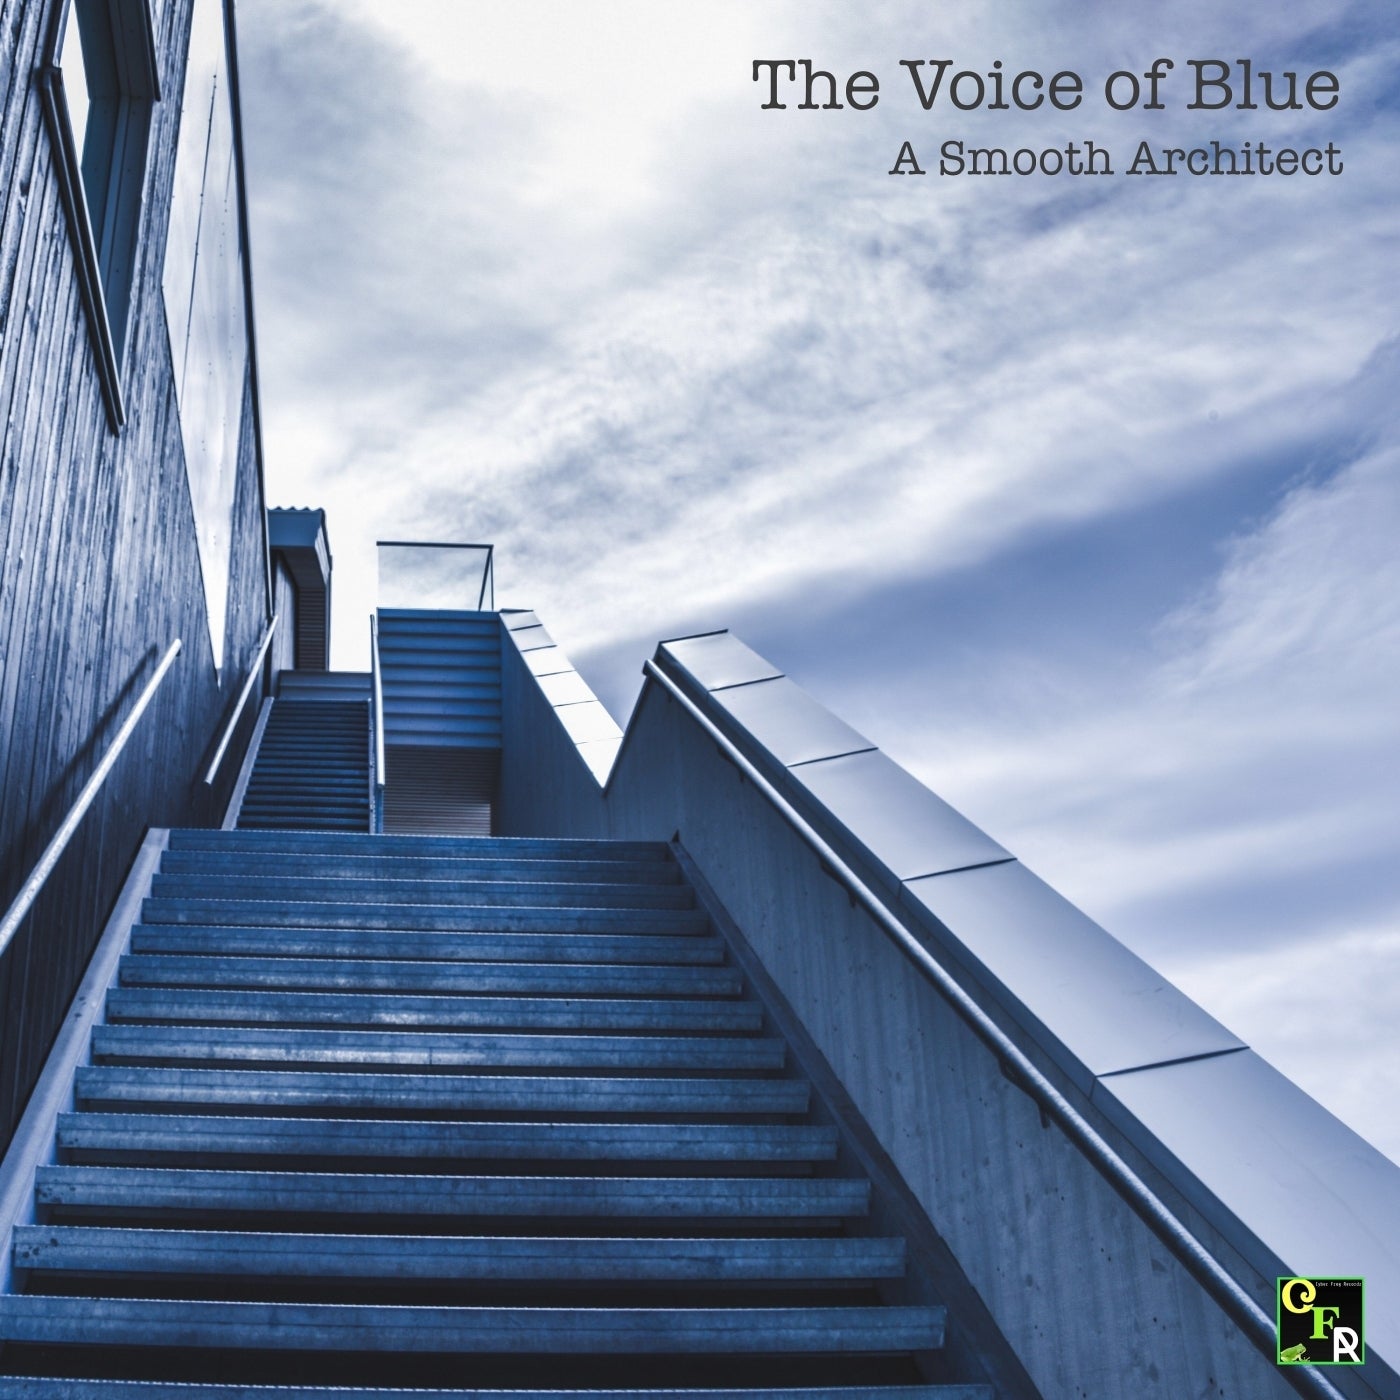 The Voice of Blue